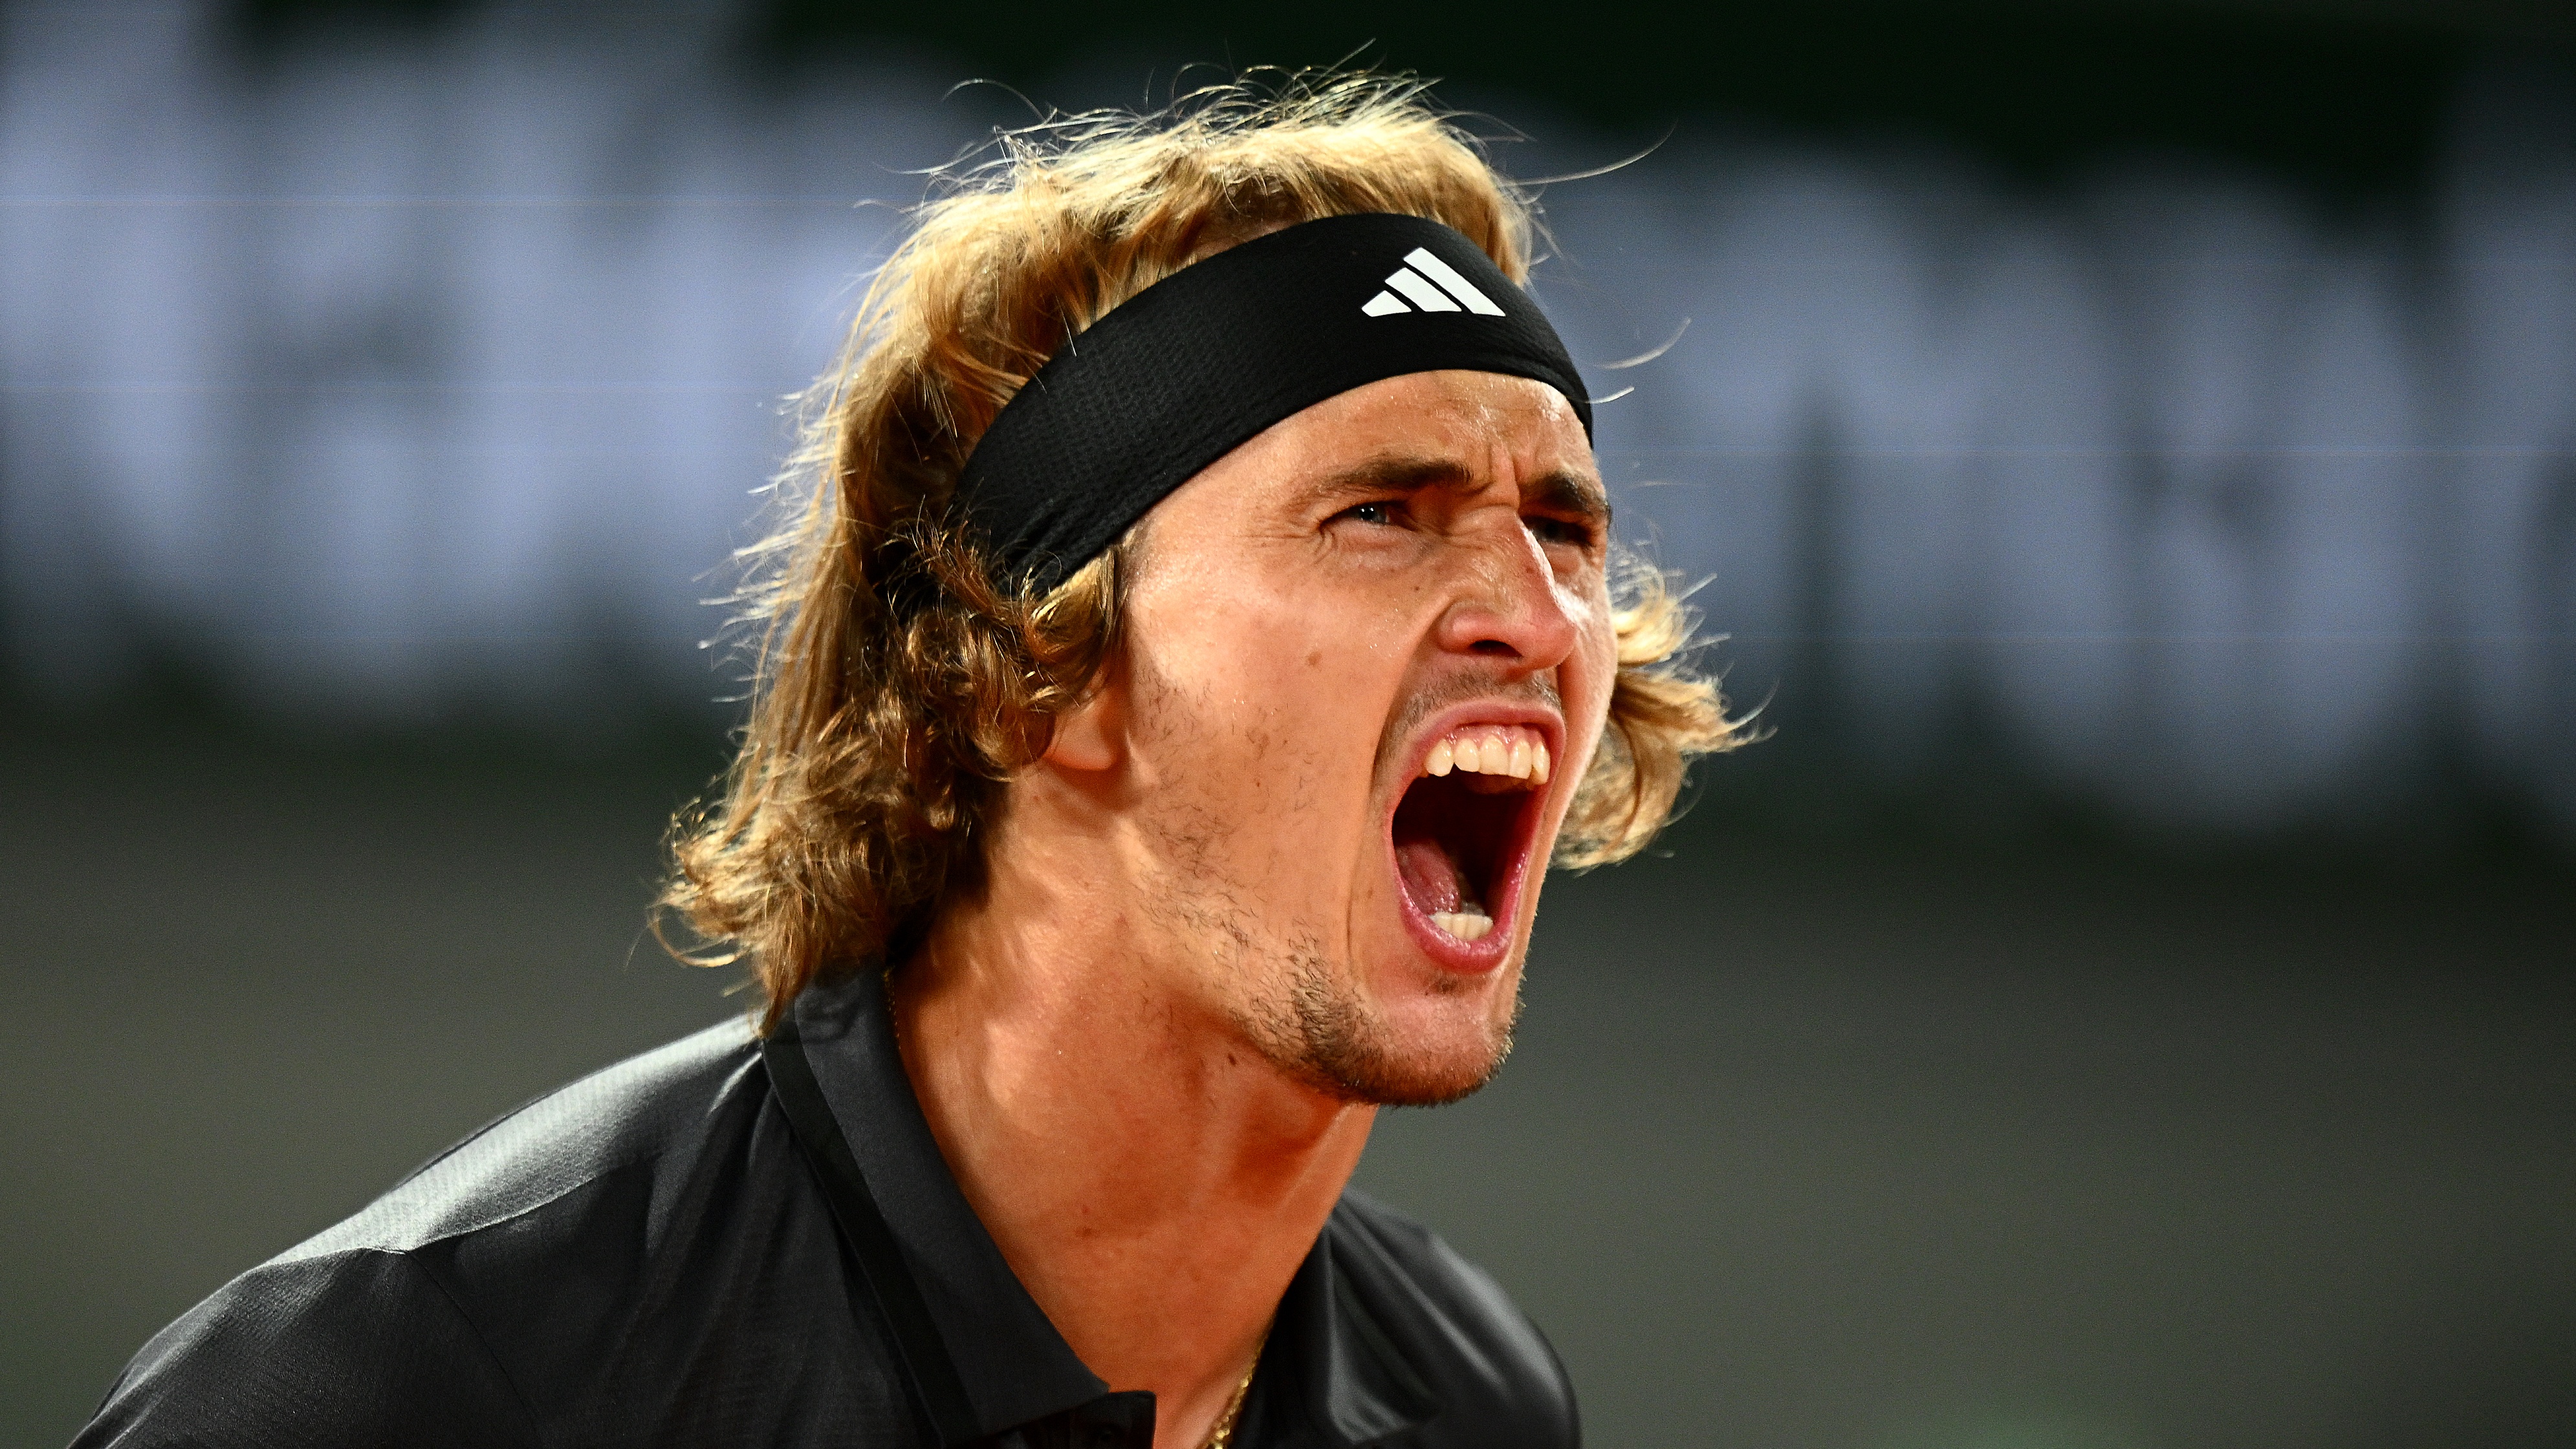 Ruud vs Zverev live stream how to watch French Open semi-final for free from anywhere TechRadar